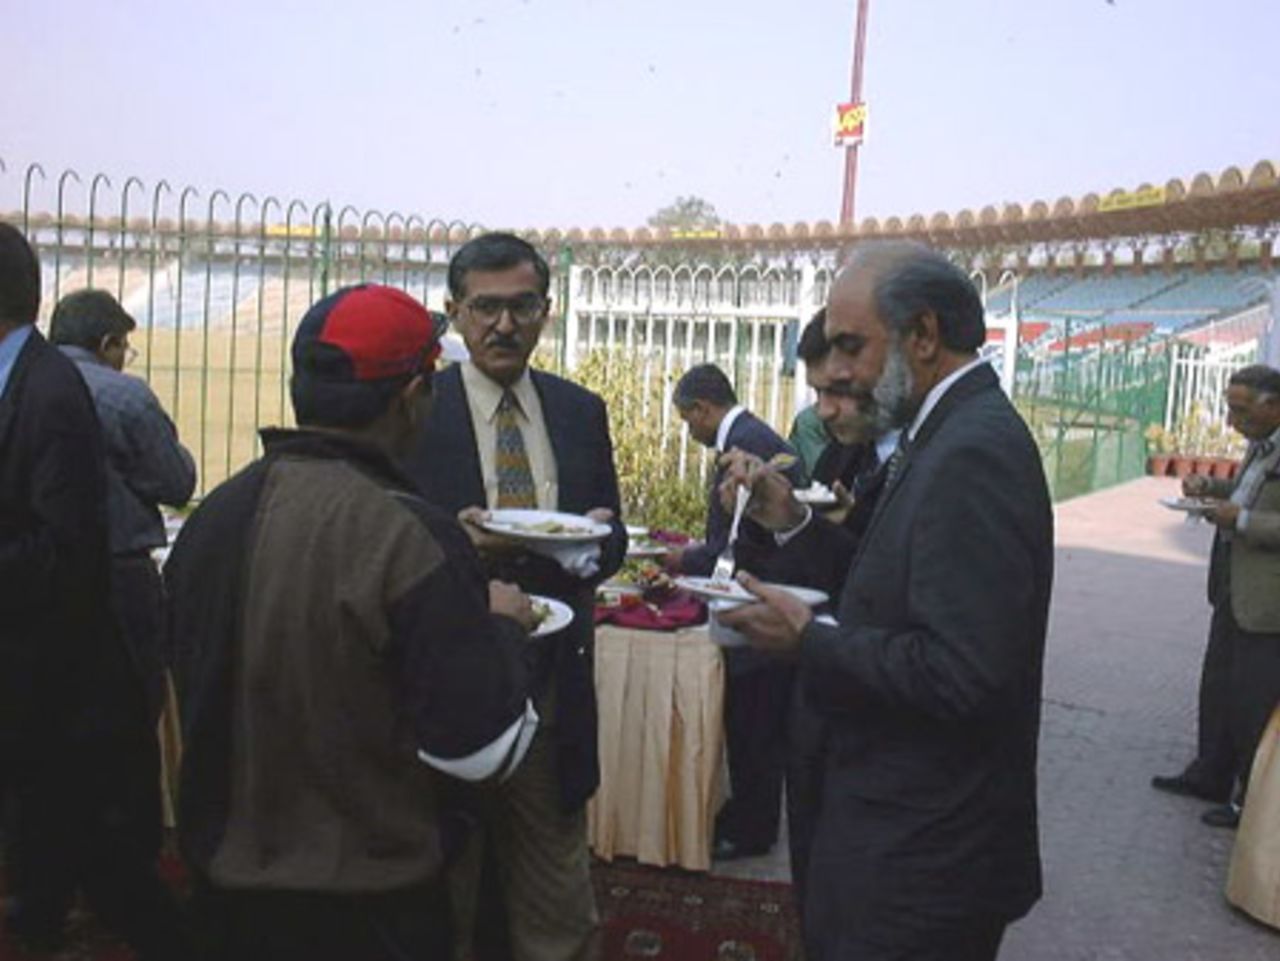 Director PCB, Brig Munawar A. Rana and Pak Under-17 selector Sultan Rana at lunch after the PCB - CricInfo Internet Rights Acquisition Ceremony at Gaddafi Stadium, Lahore 5 Feb 2001